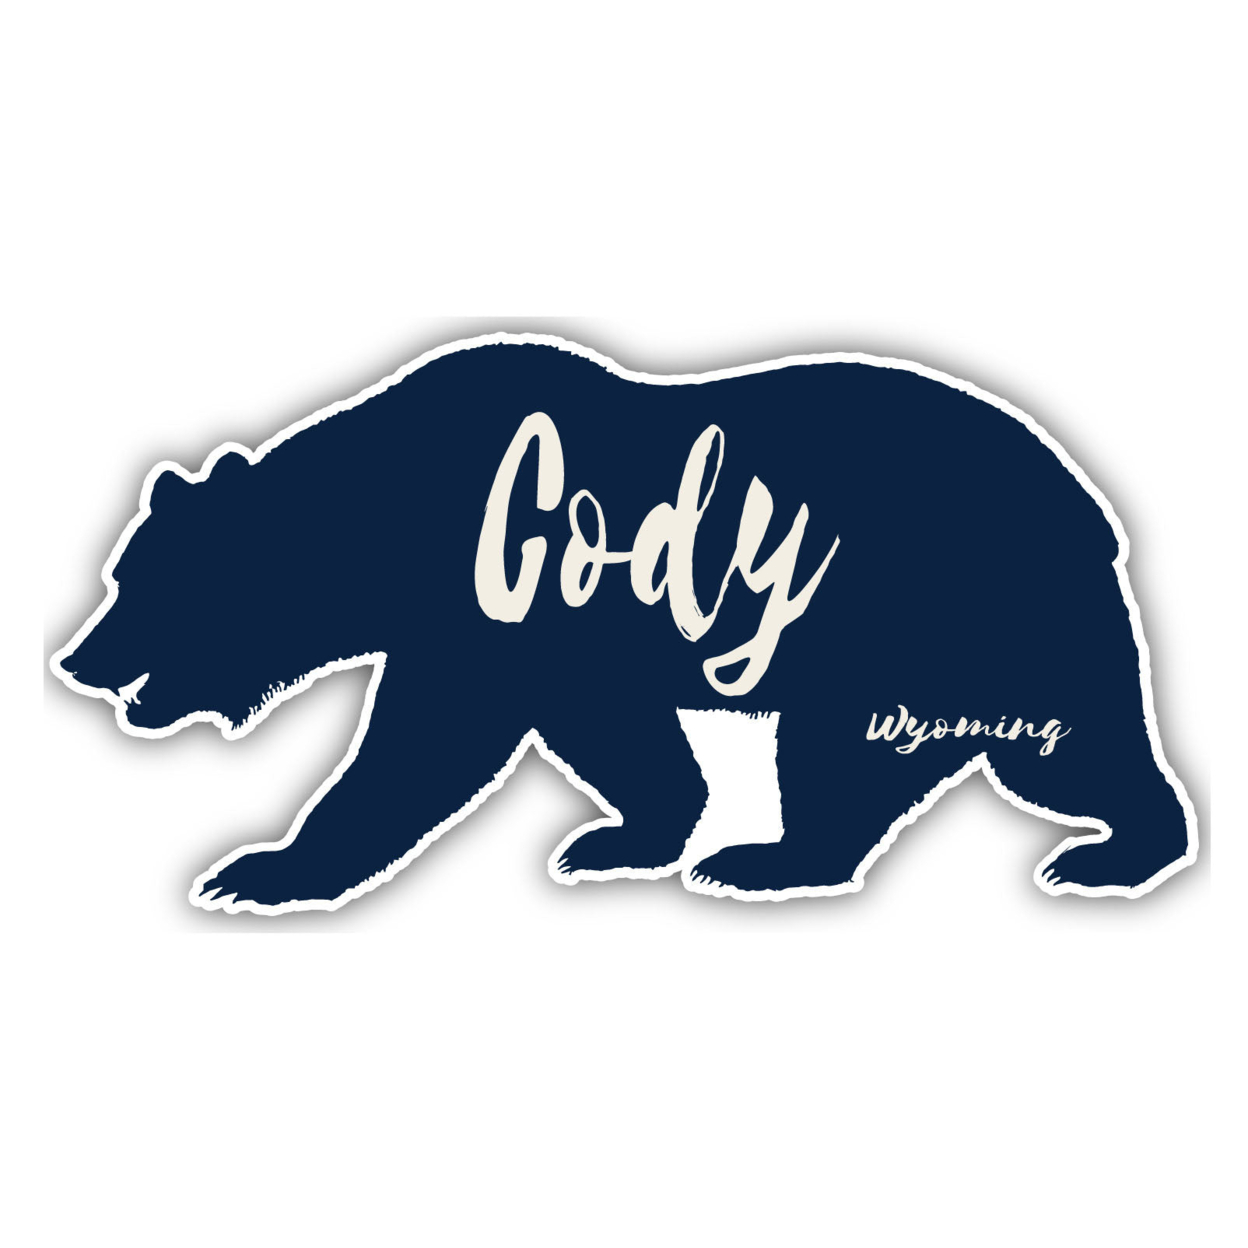 Cody Wyoming Souvenir Decorative Stickers (Choose Theme And Size) - Single Unit, 4-Inch, Bear